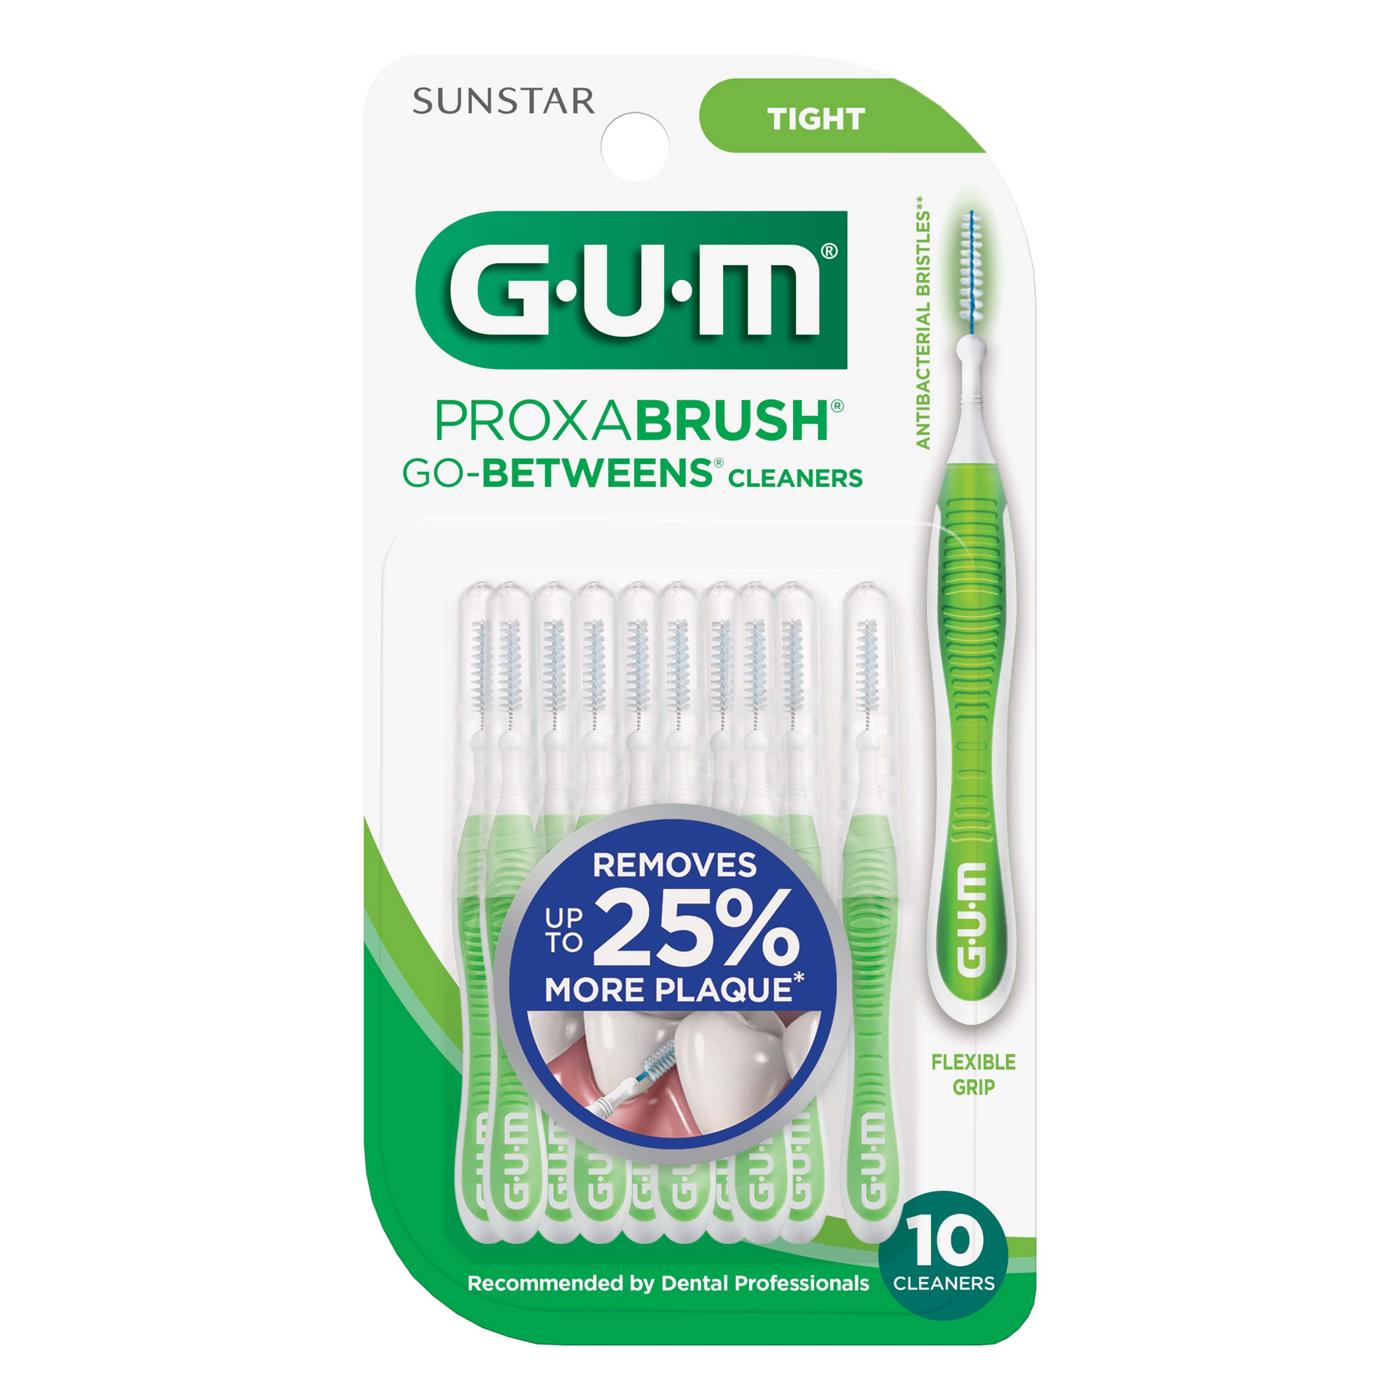 GUM Proxabrush Go-Betweens Cleaners - Tight; image 1 of 2